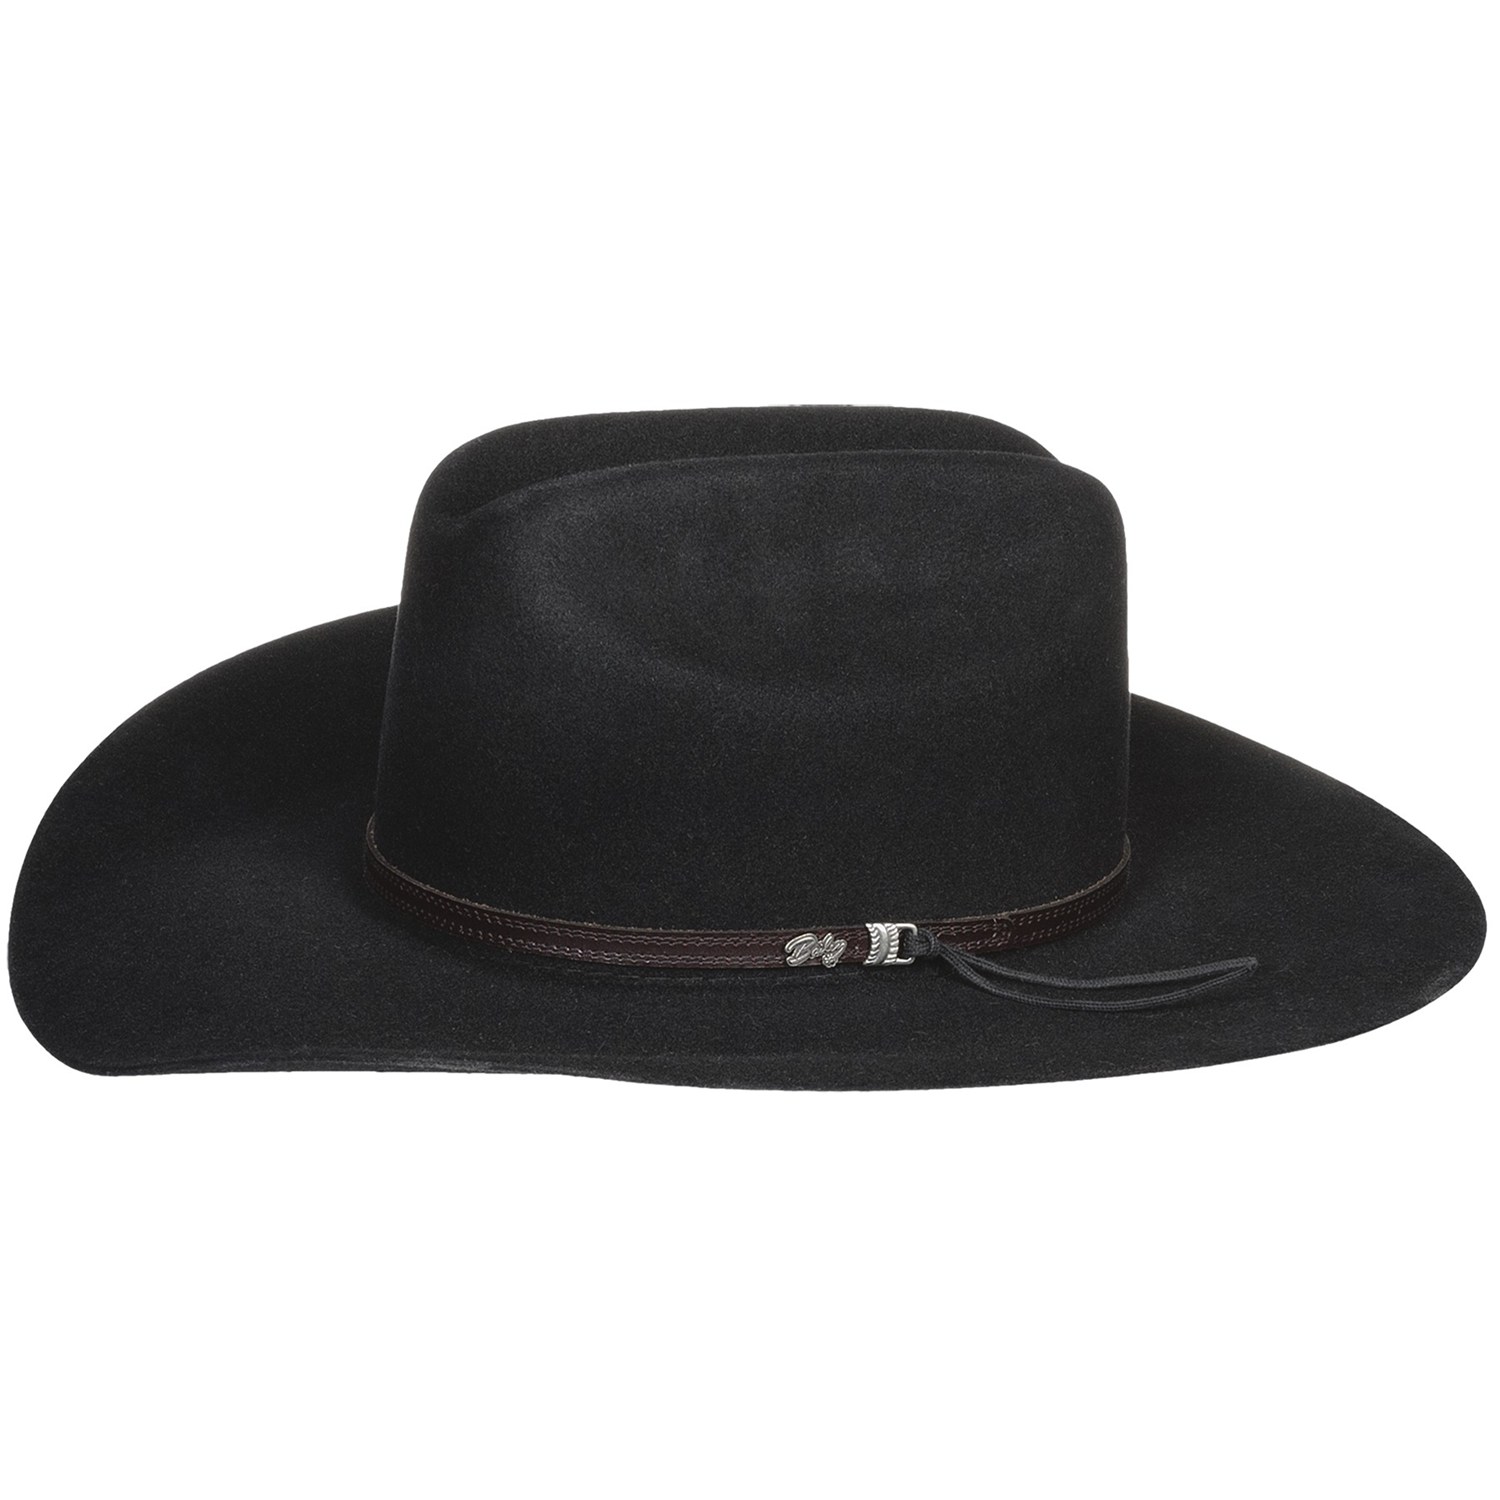 Women's Cowboy Hats up to 71% off at Sierra Trading Post